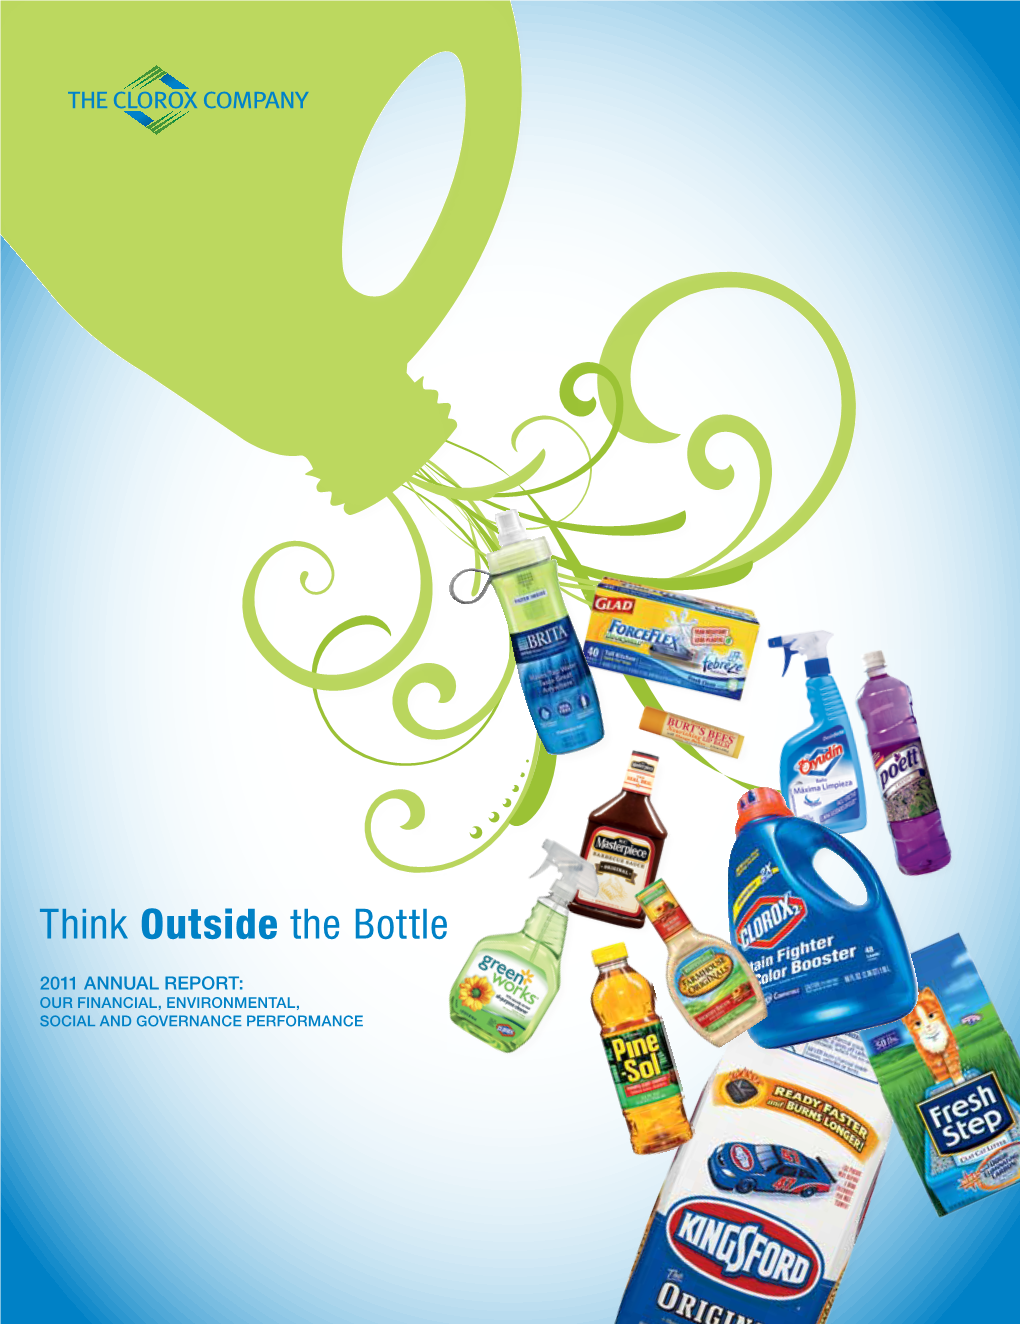 Think Outside the Bottle